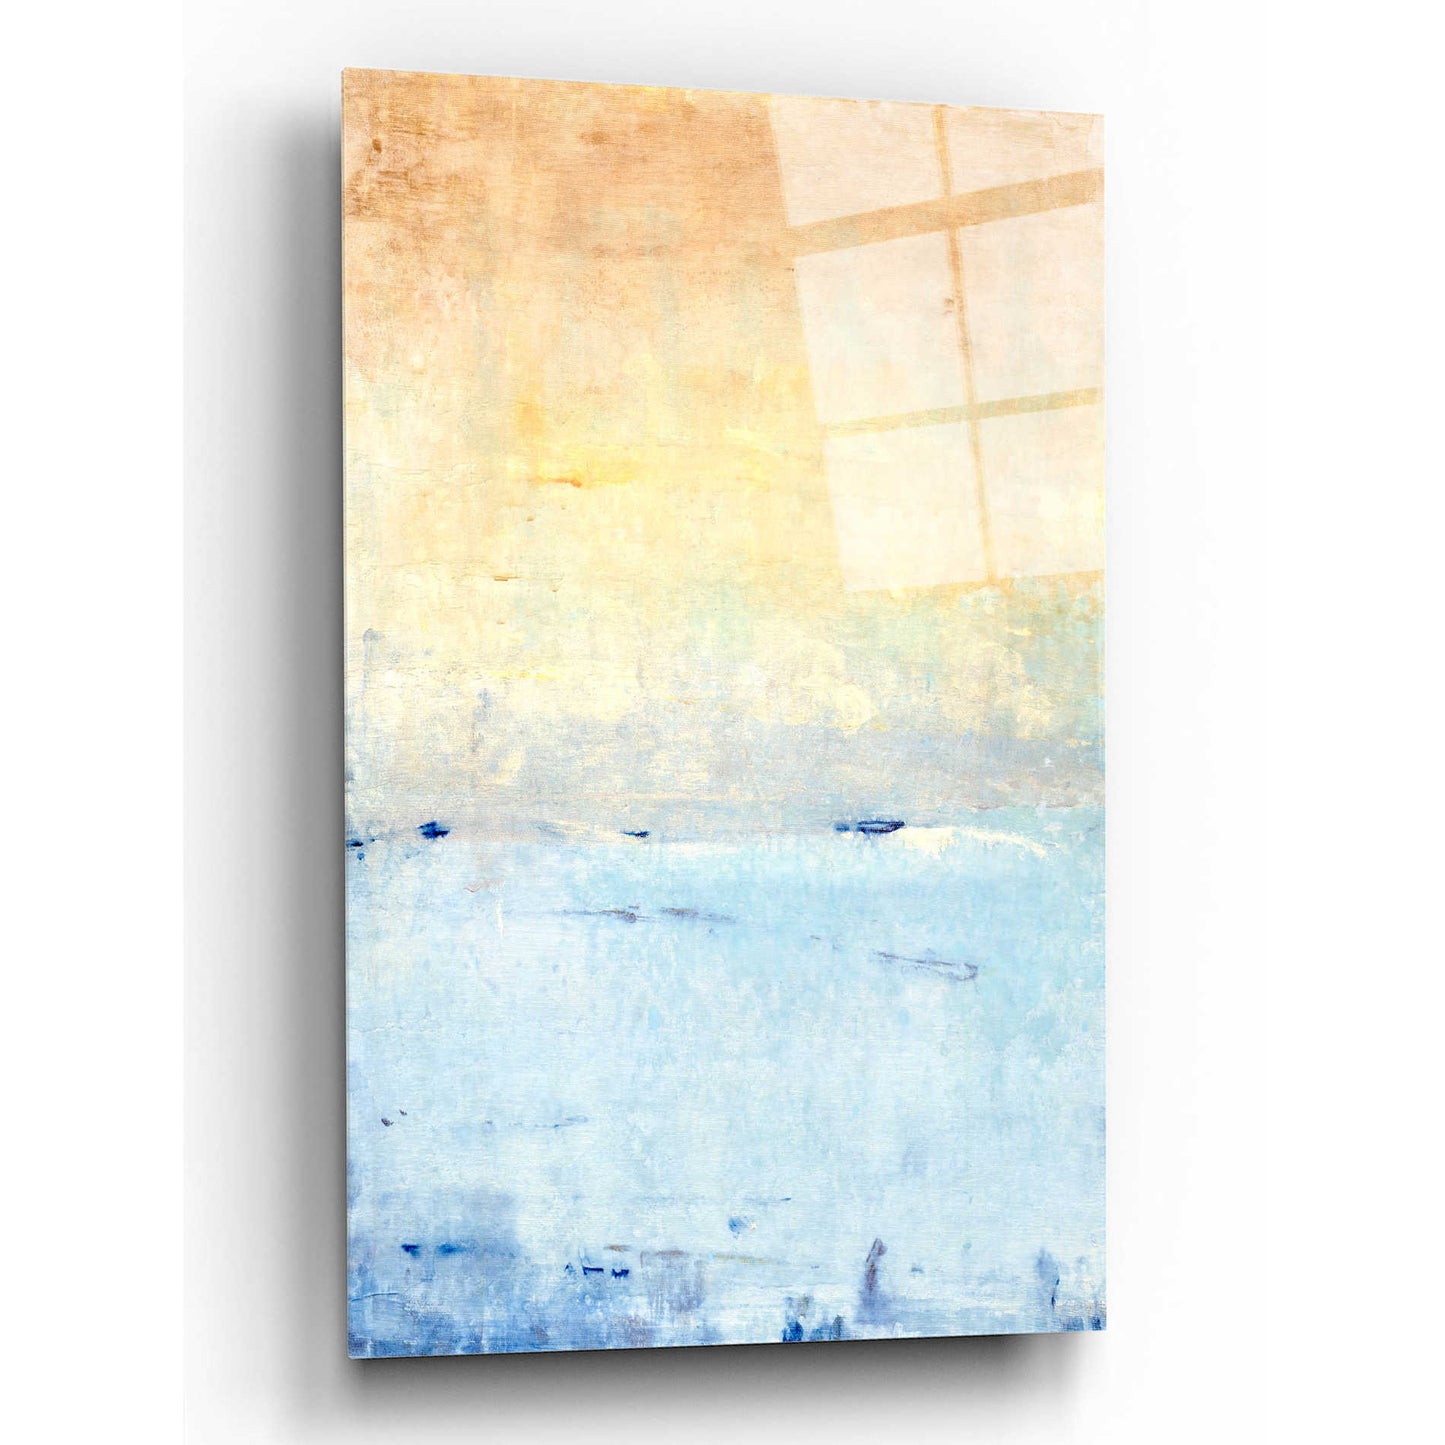 Epic Art 'Inlet at Sunrise II' by Tim O'Toole, Acrylic Glass Wall Art,12x16